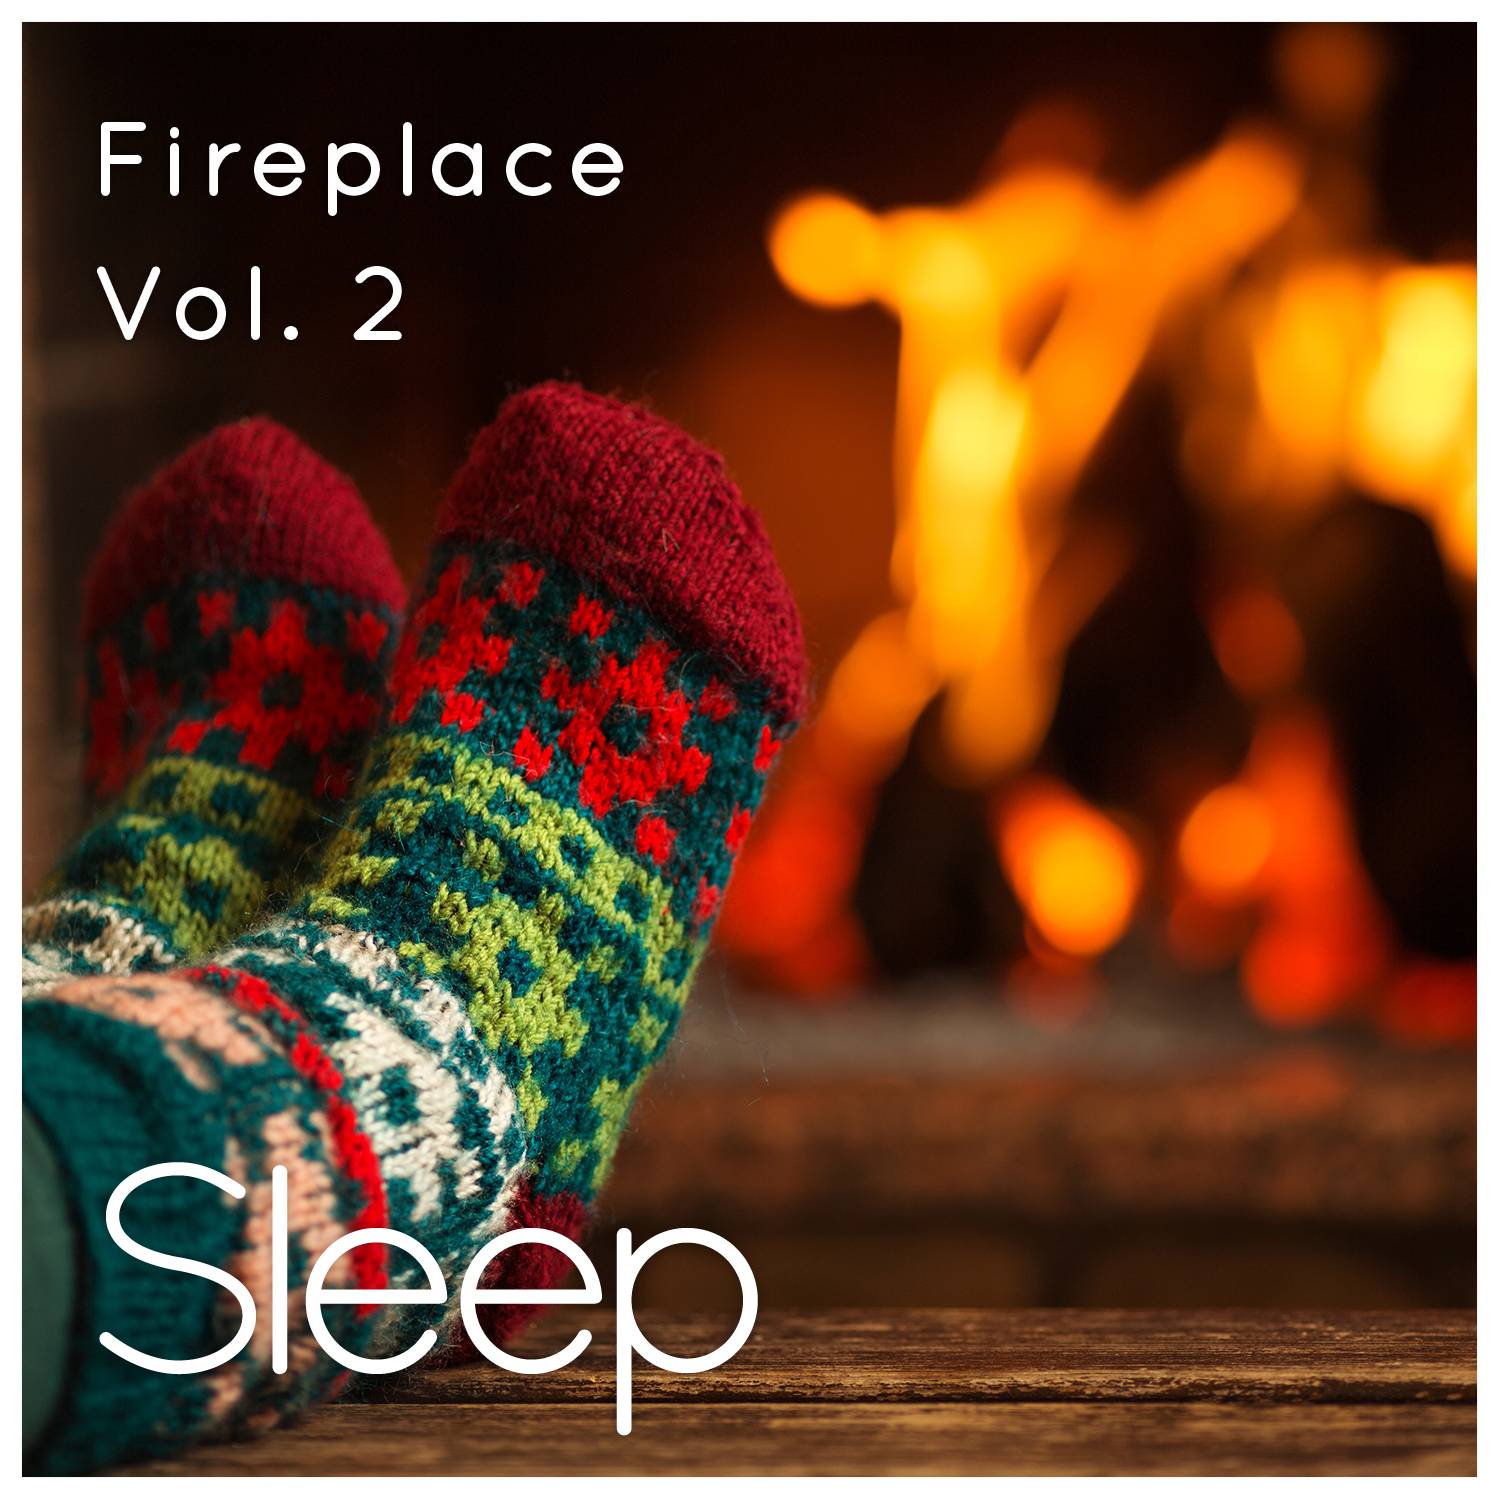 Sleep by Fireplace in Cabin, Vol. 2